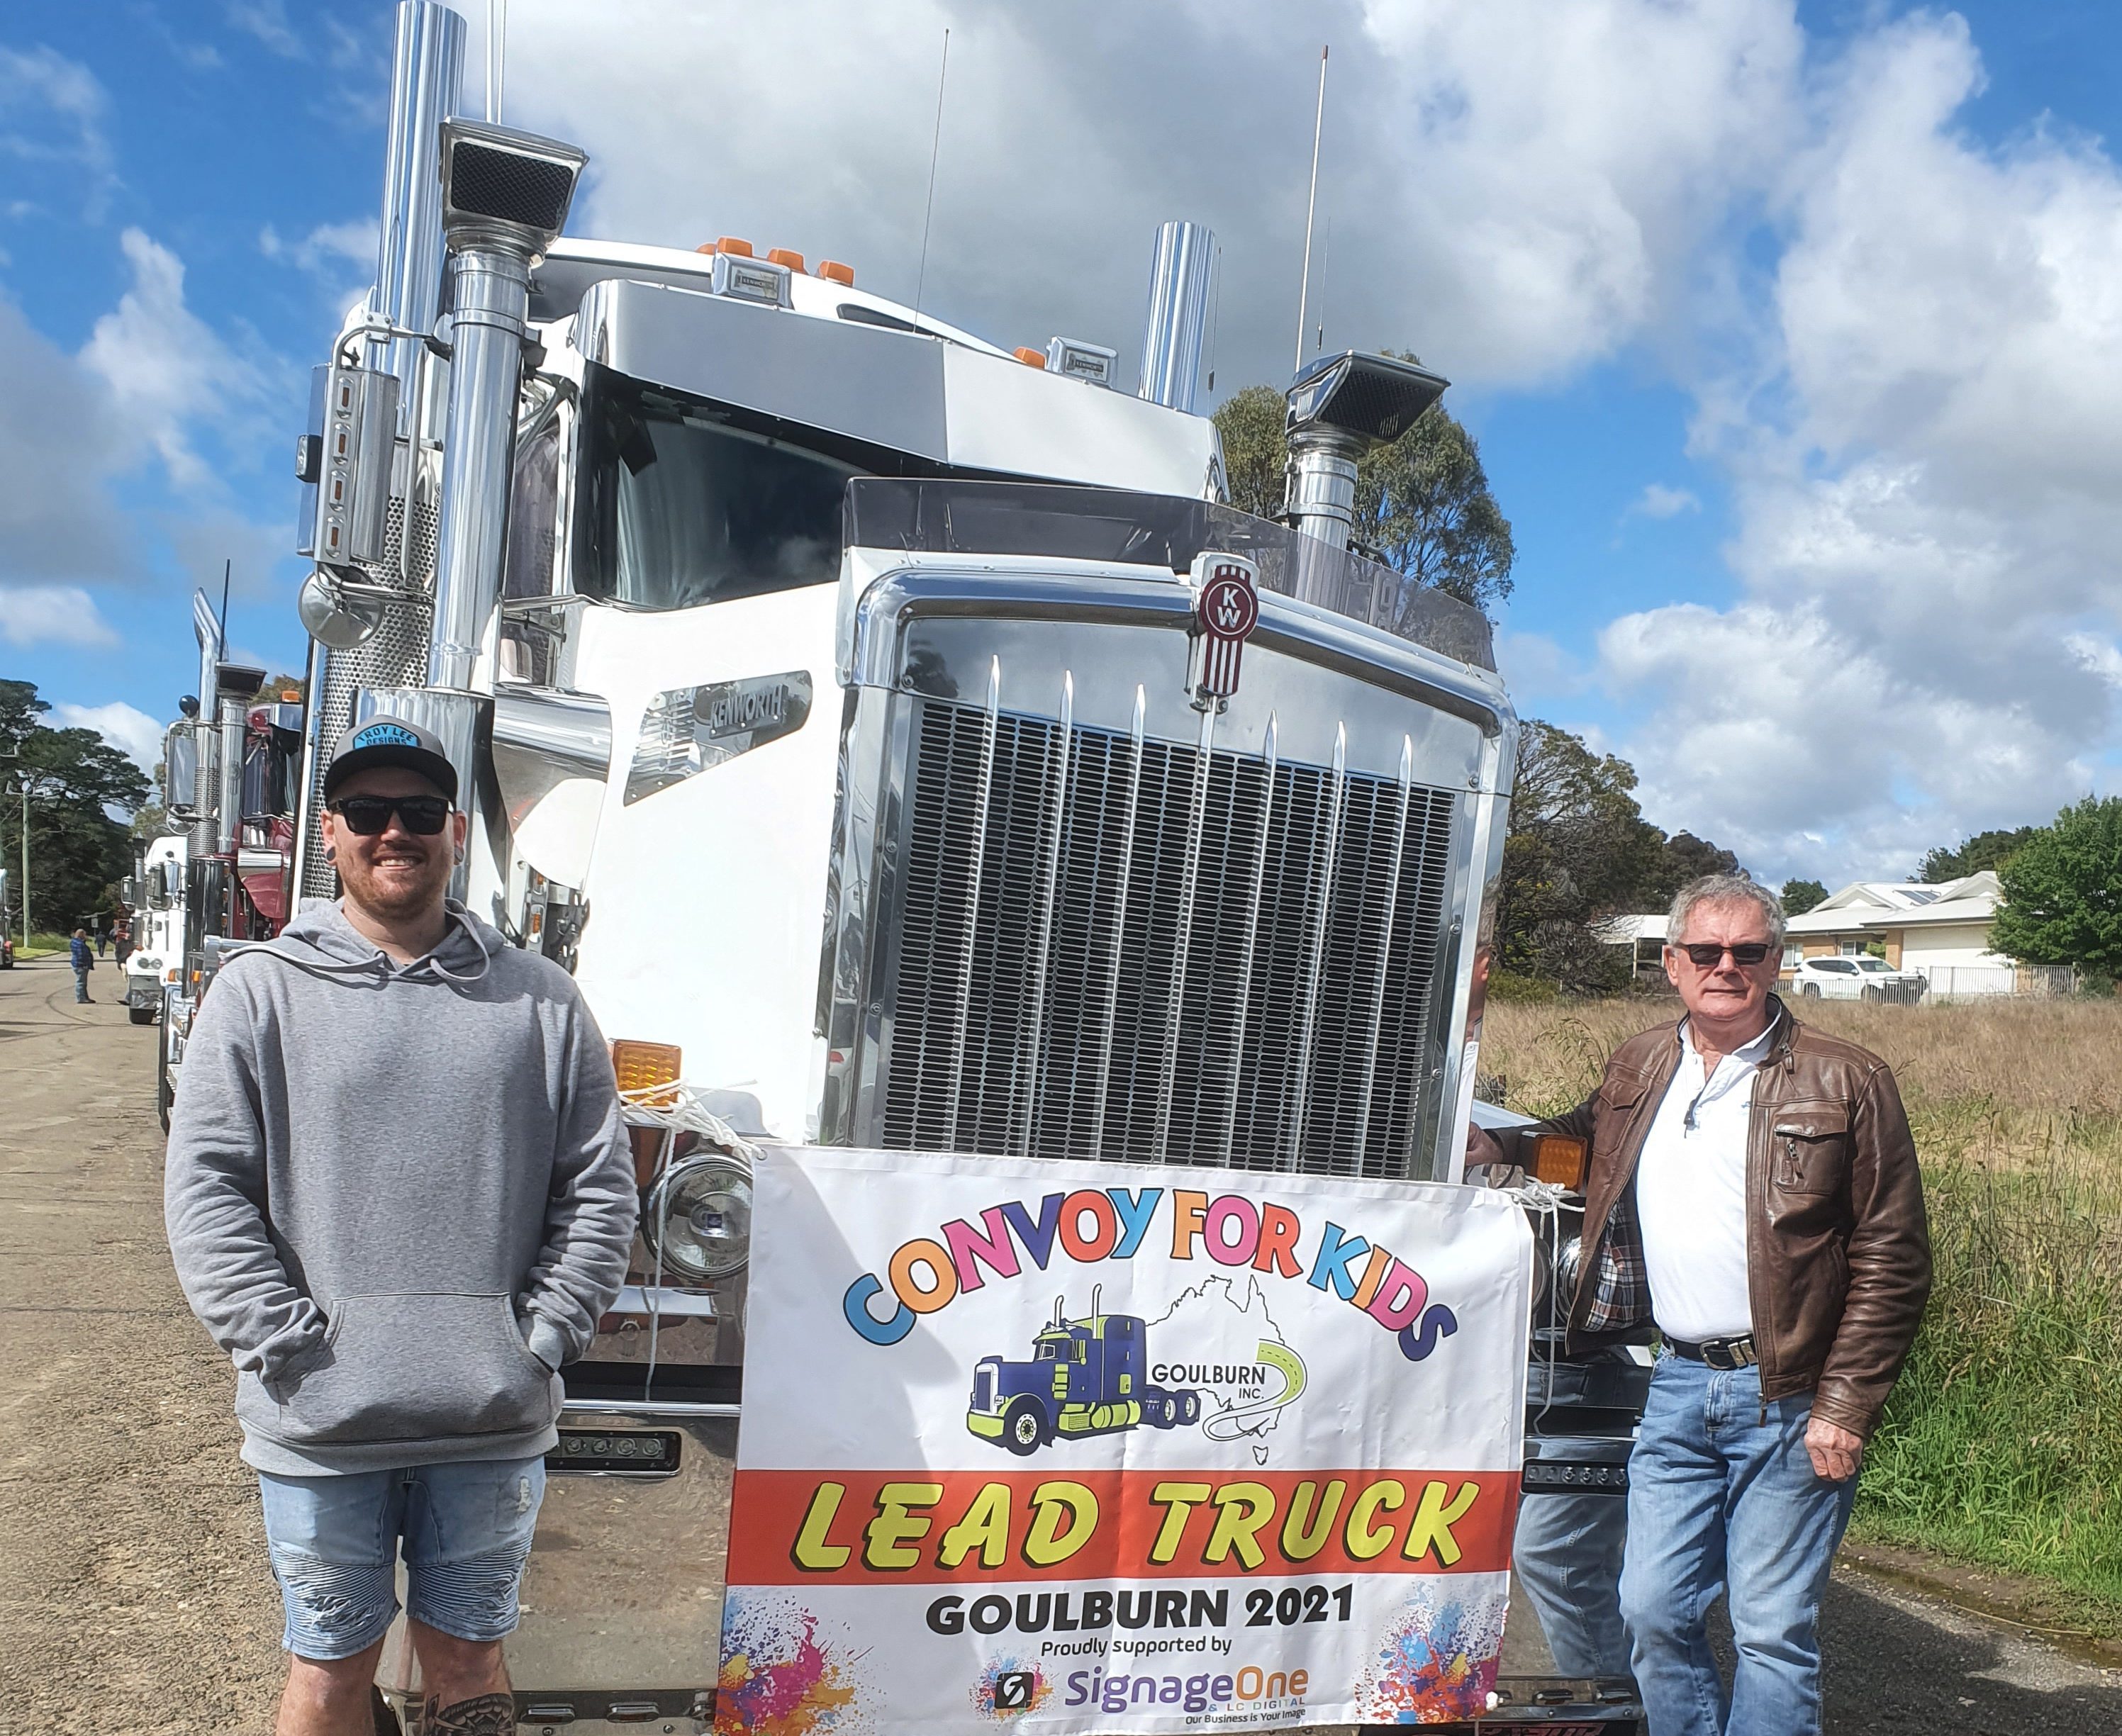 On the road again - Goulburn's truck convoy rolls in thirty grand for sick kids